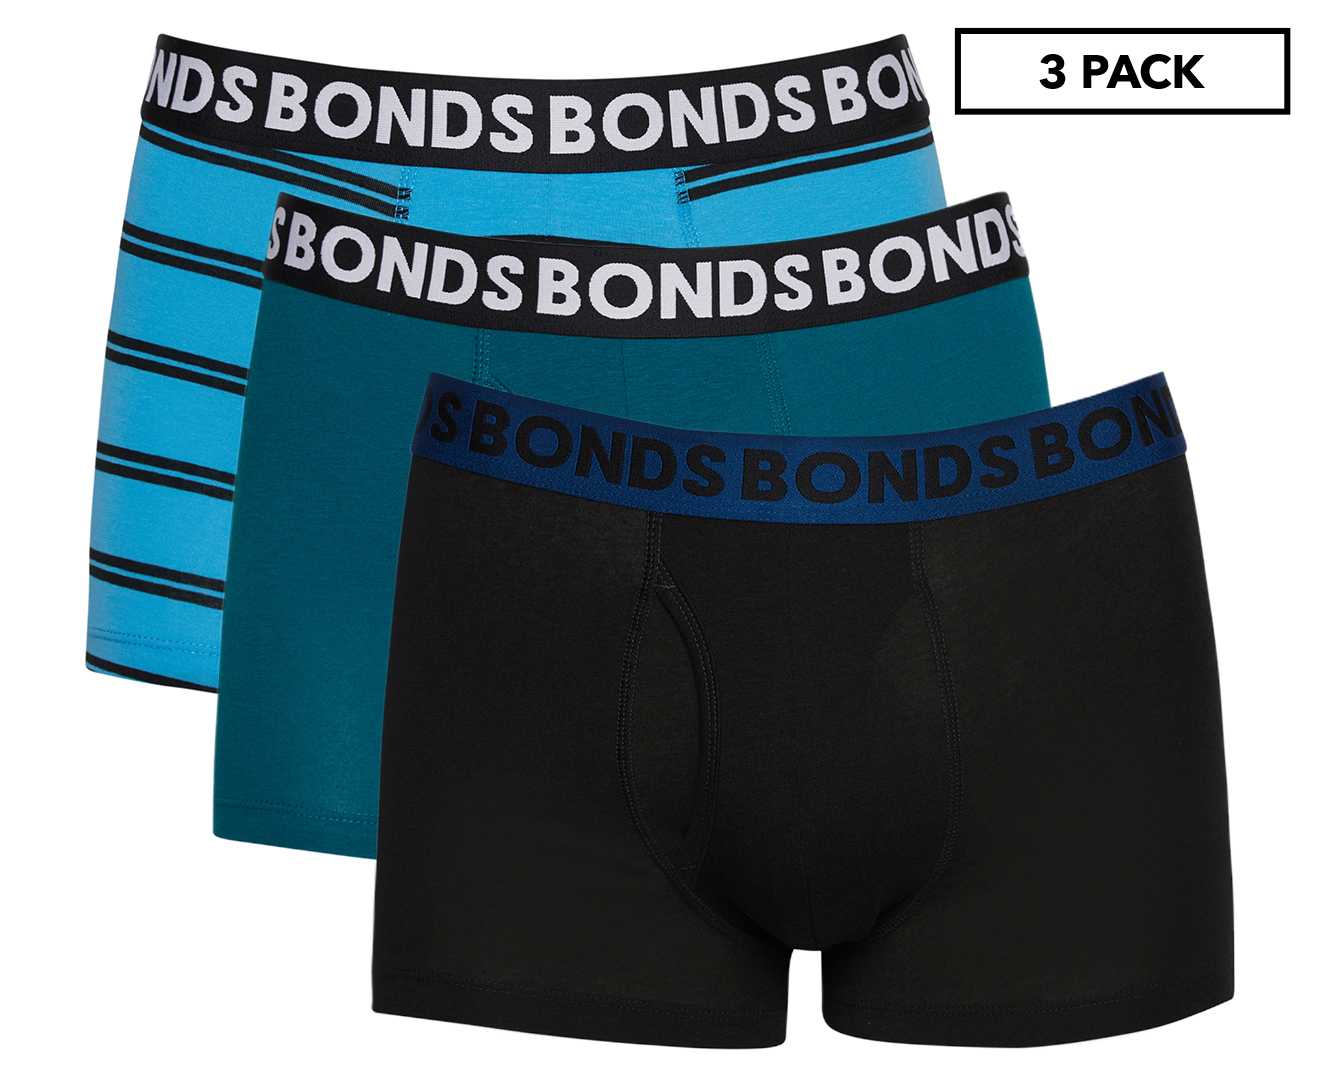 3 PACK MENS BONDS FLY-FRONT TRUNKS UNDIES SHORTS